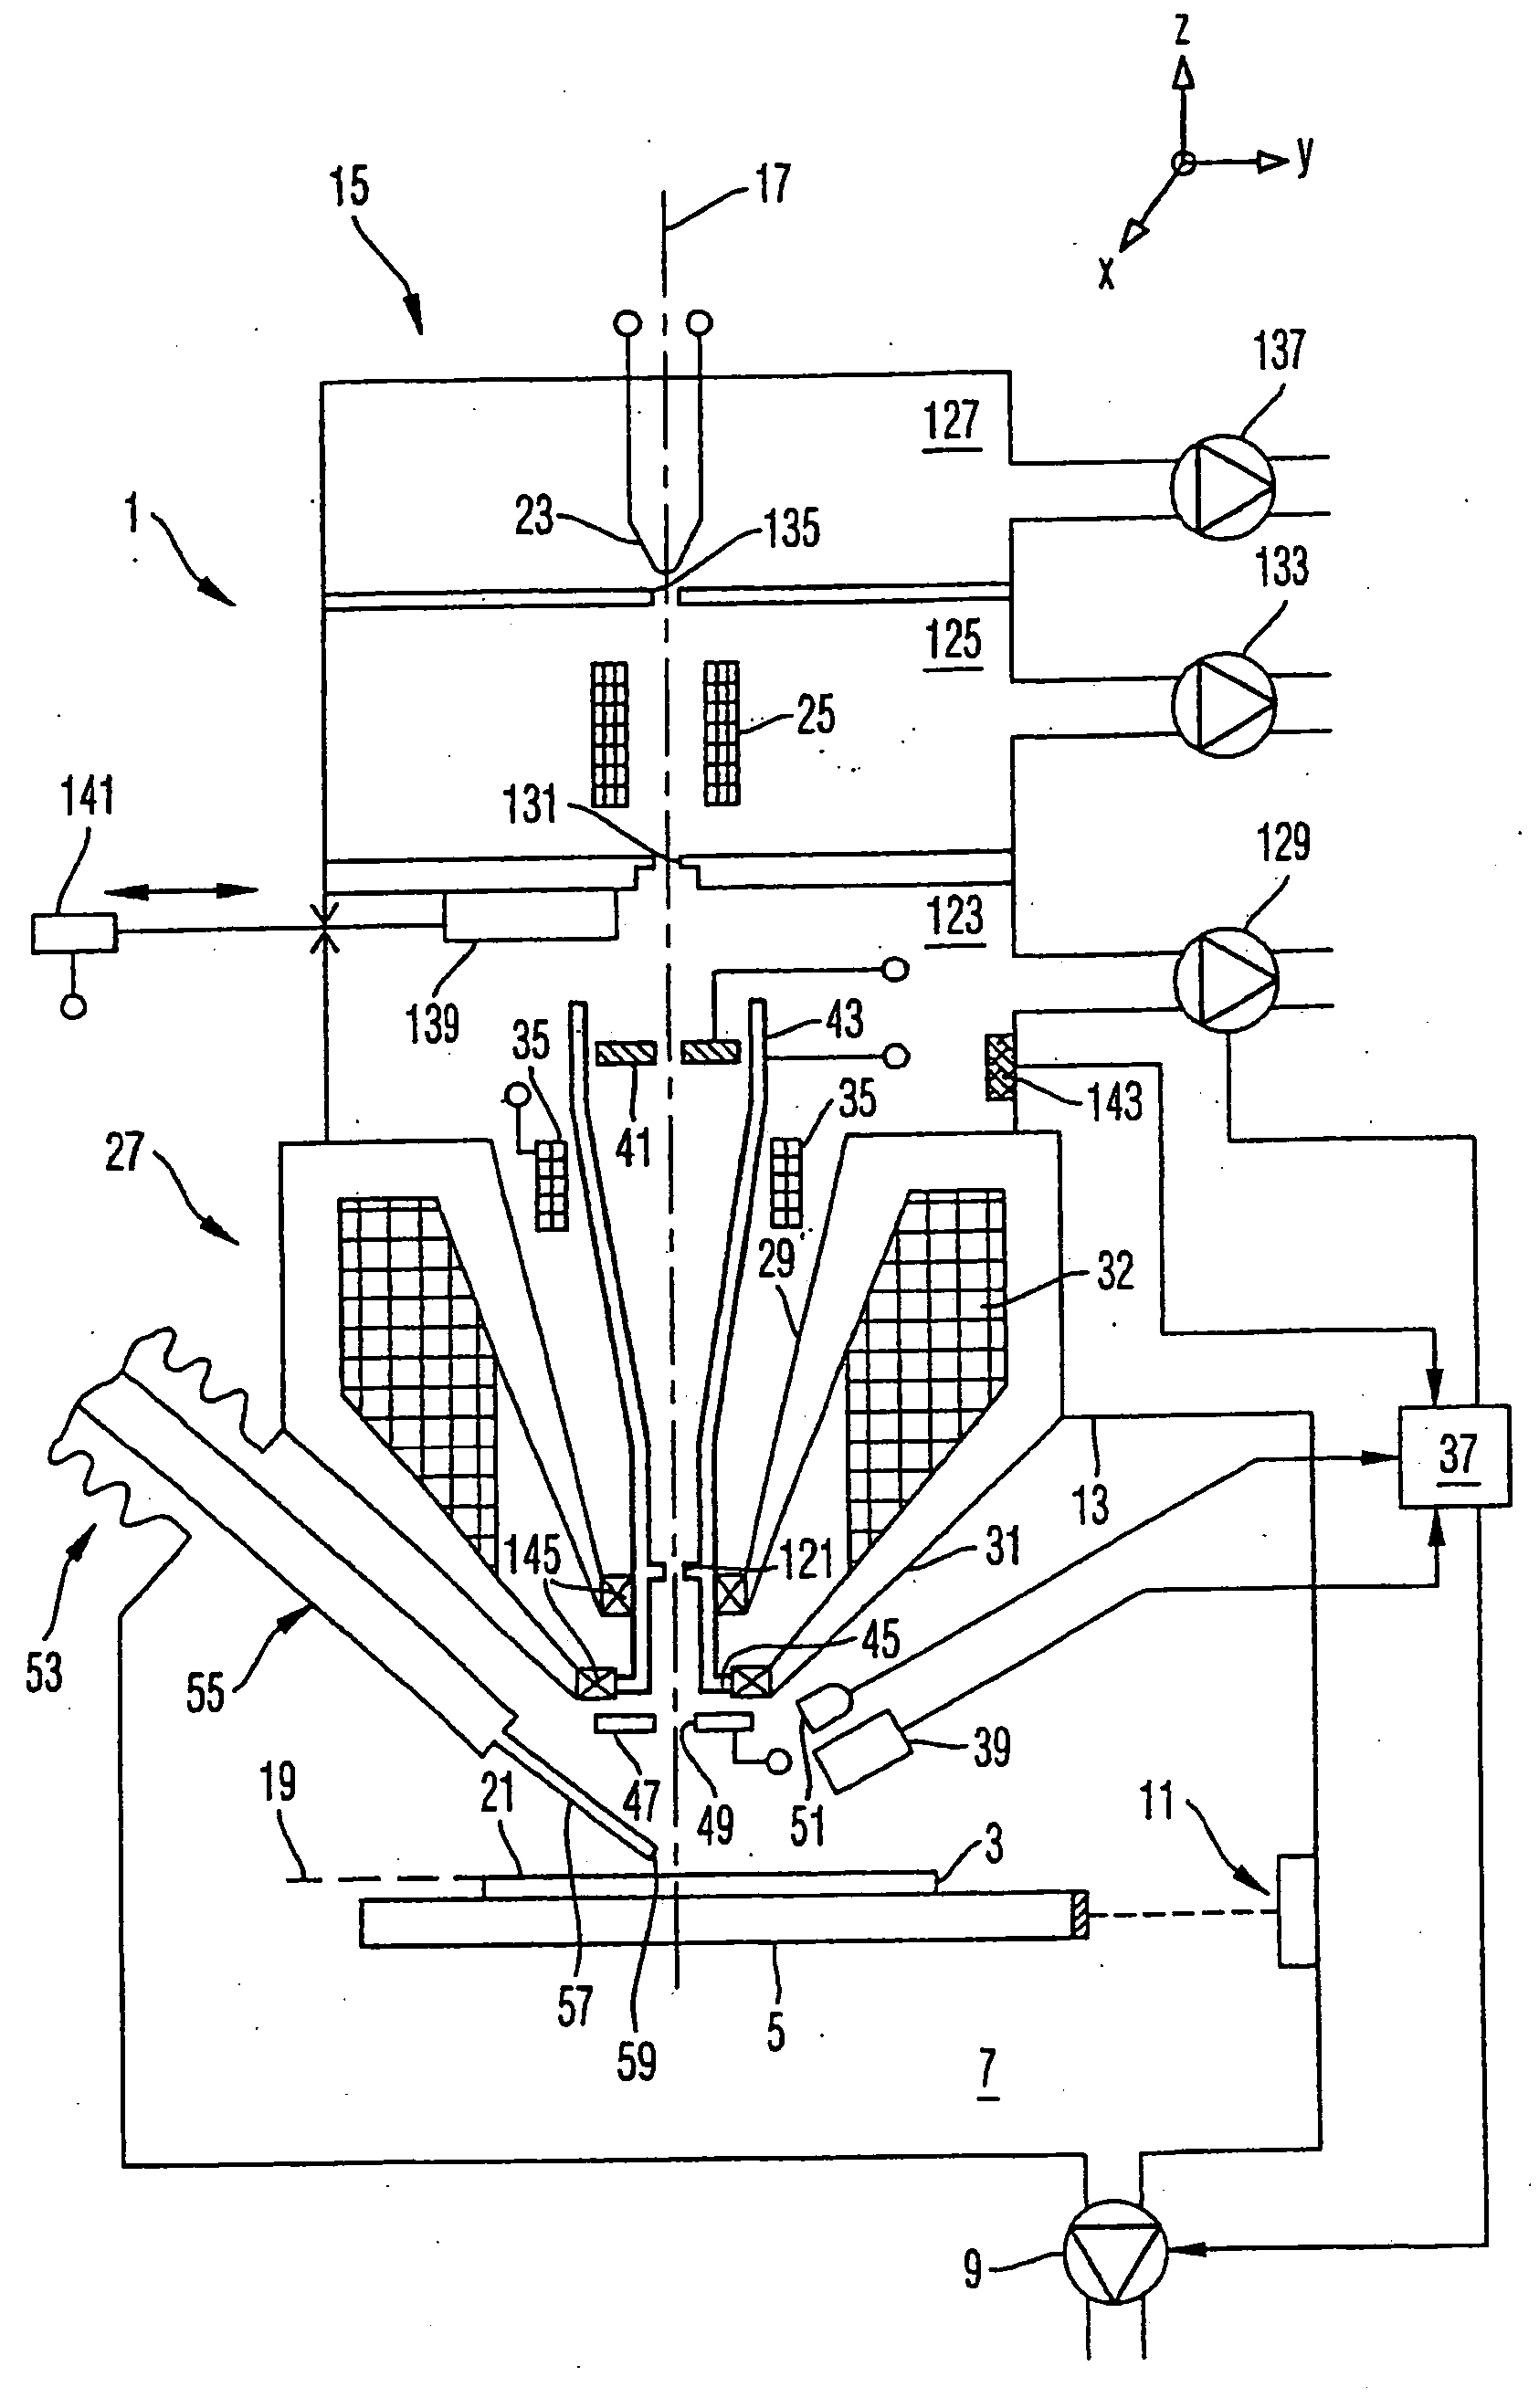 Material processing system and method